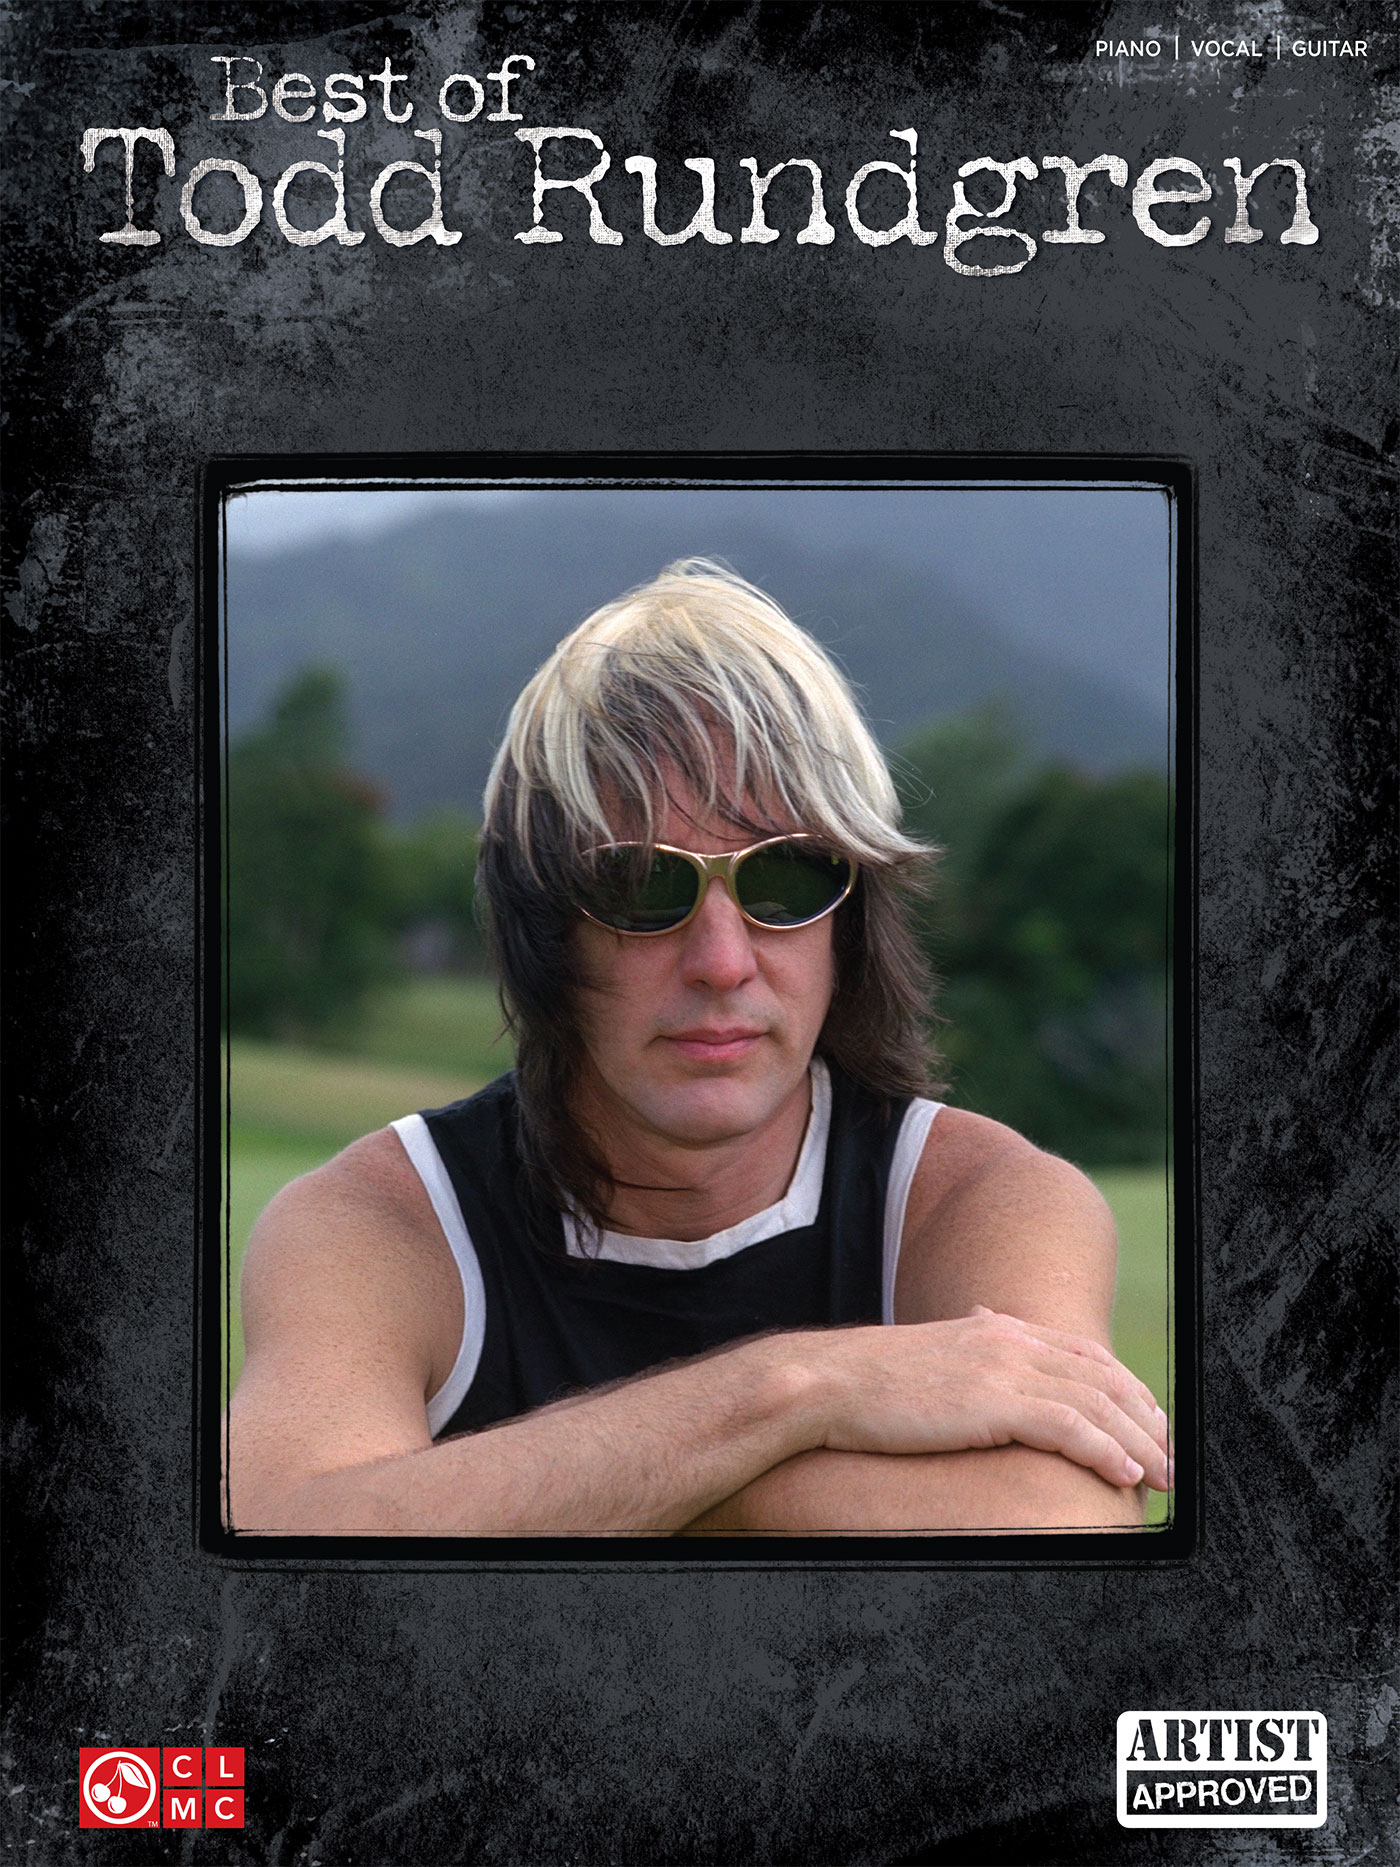 This book was approved by Todd Rundgren Cover photo by Danny OConnor Special - photo 1